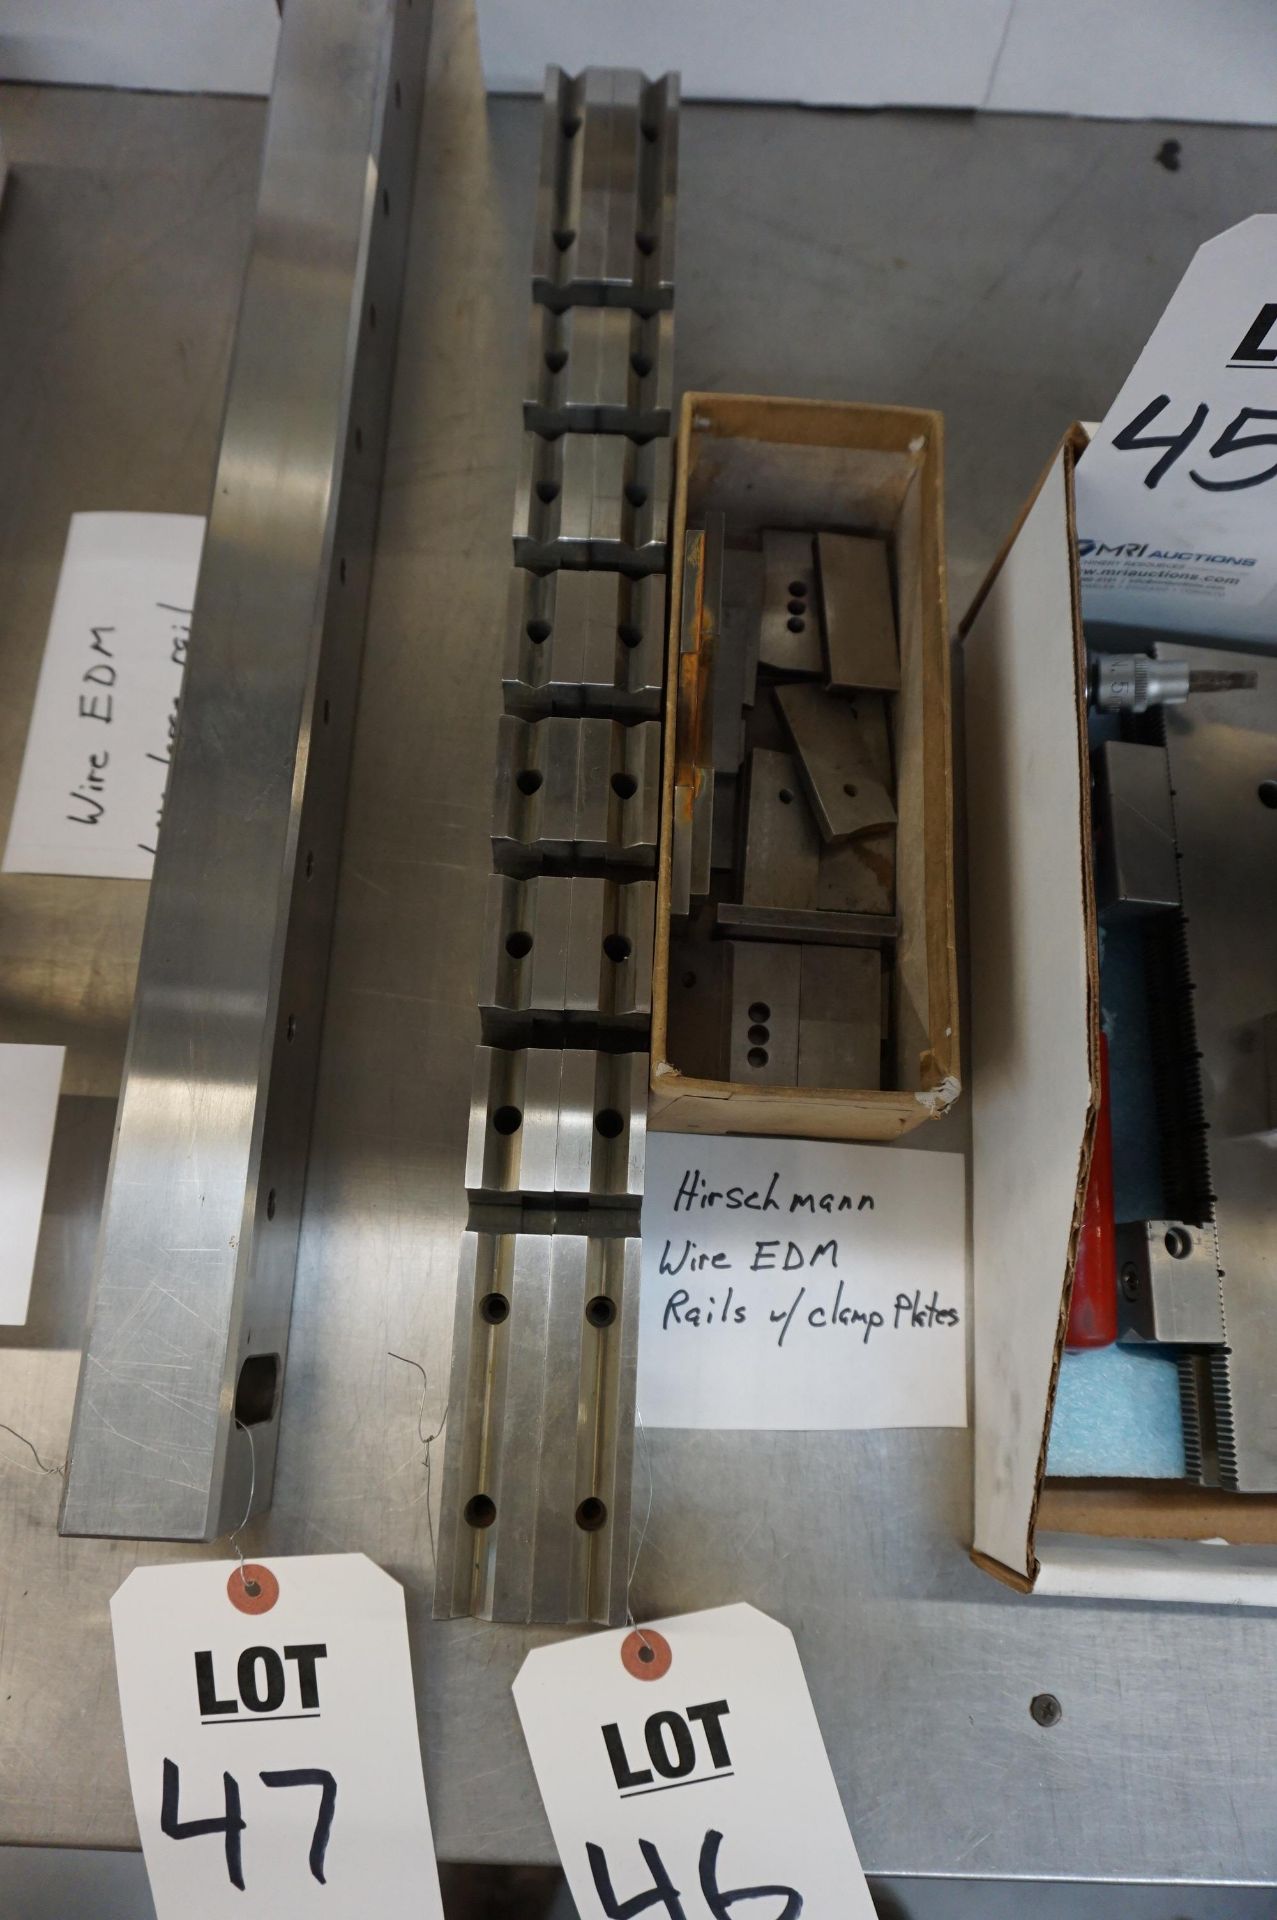 HIRSCHMANN WIRE EDM RAILS WITH CLAMP PLATES - Image 2 of 2